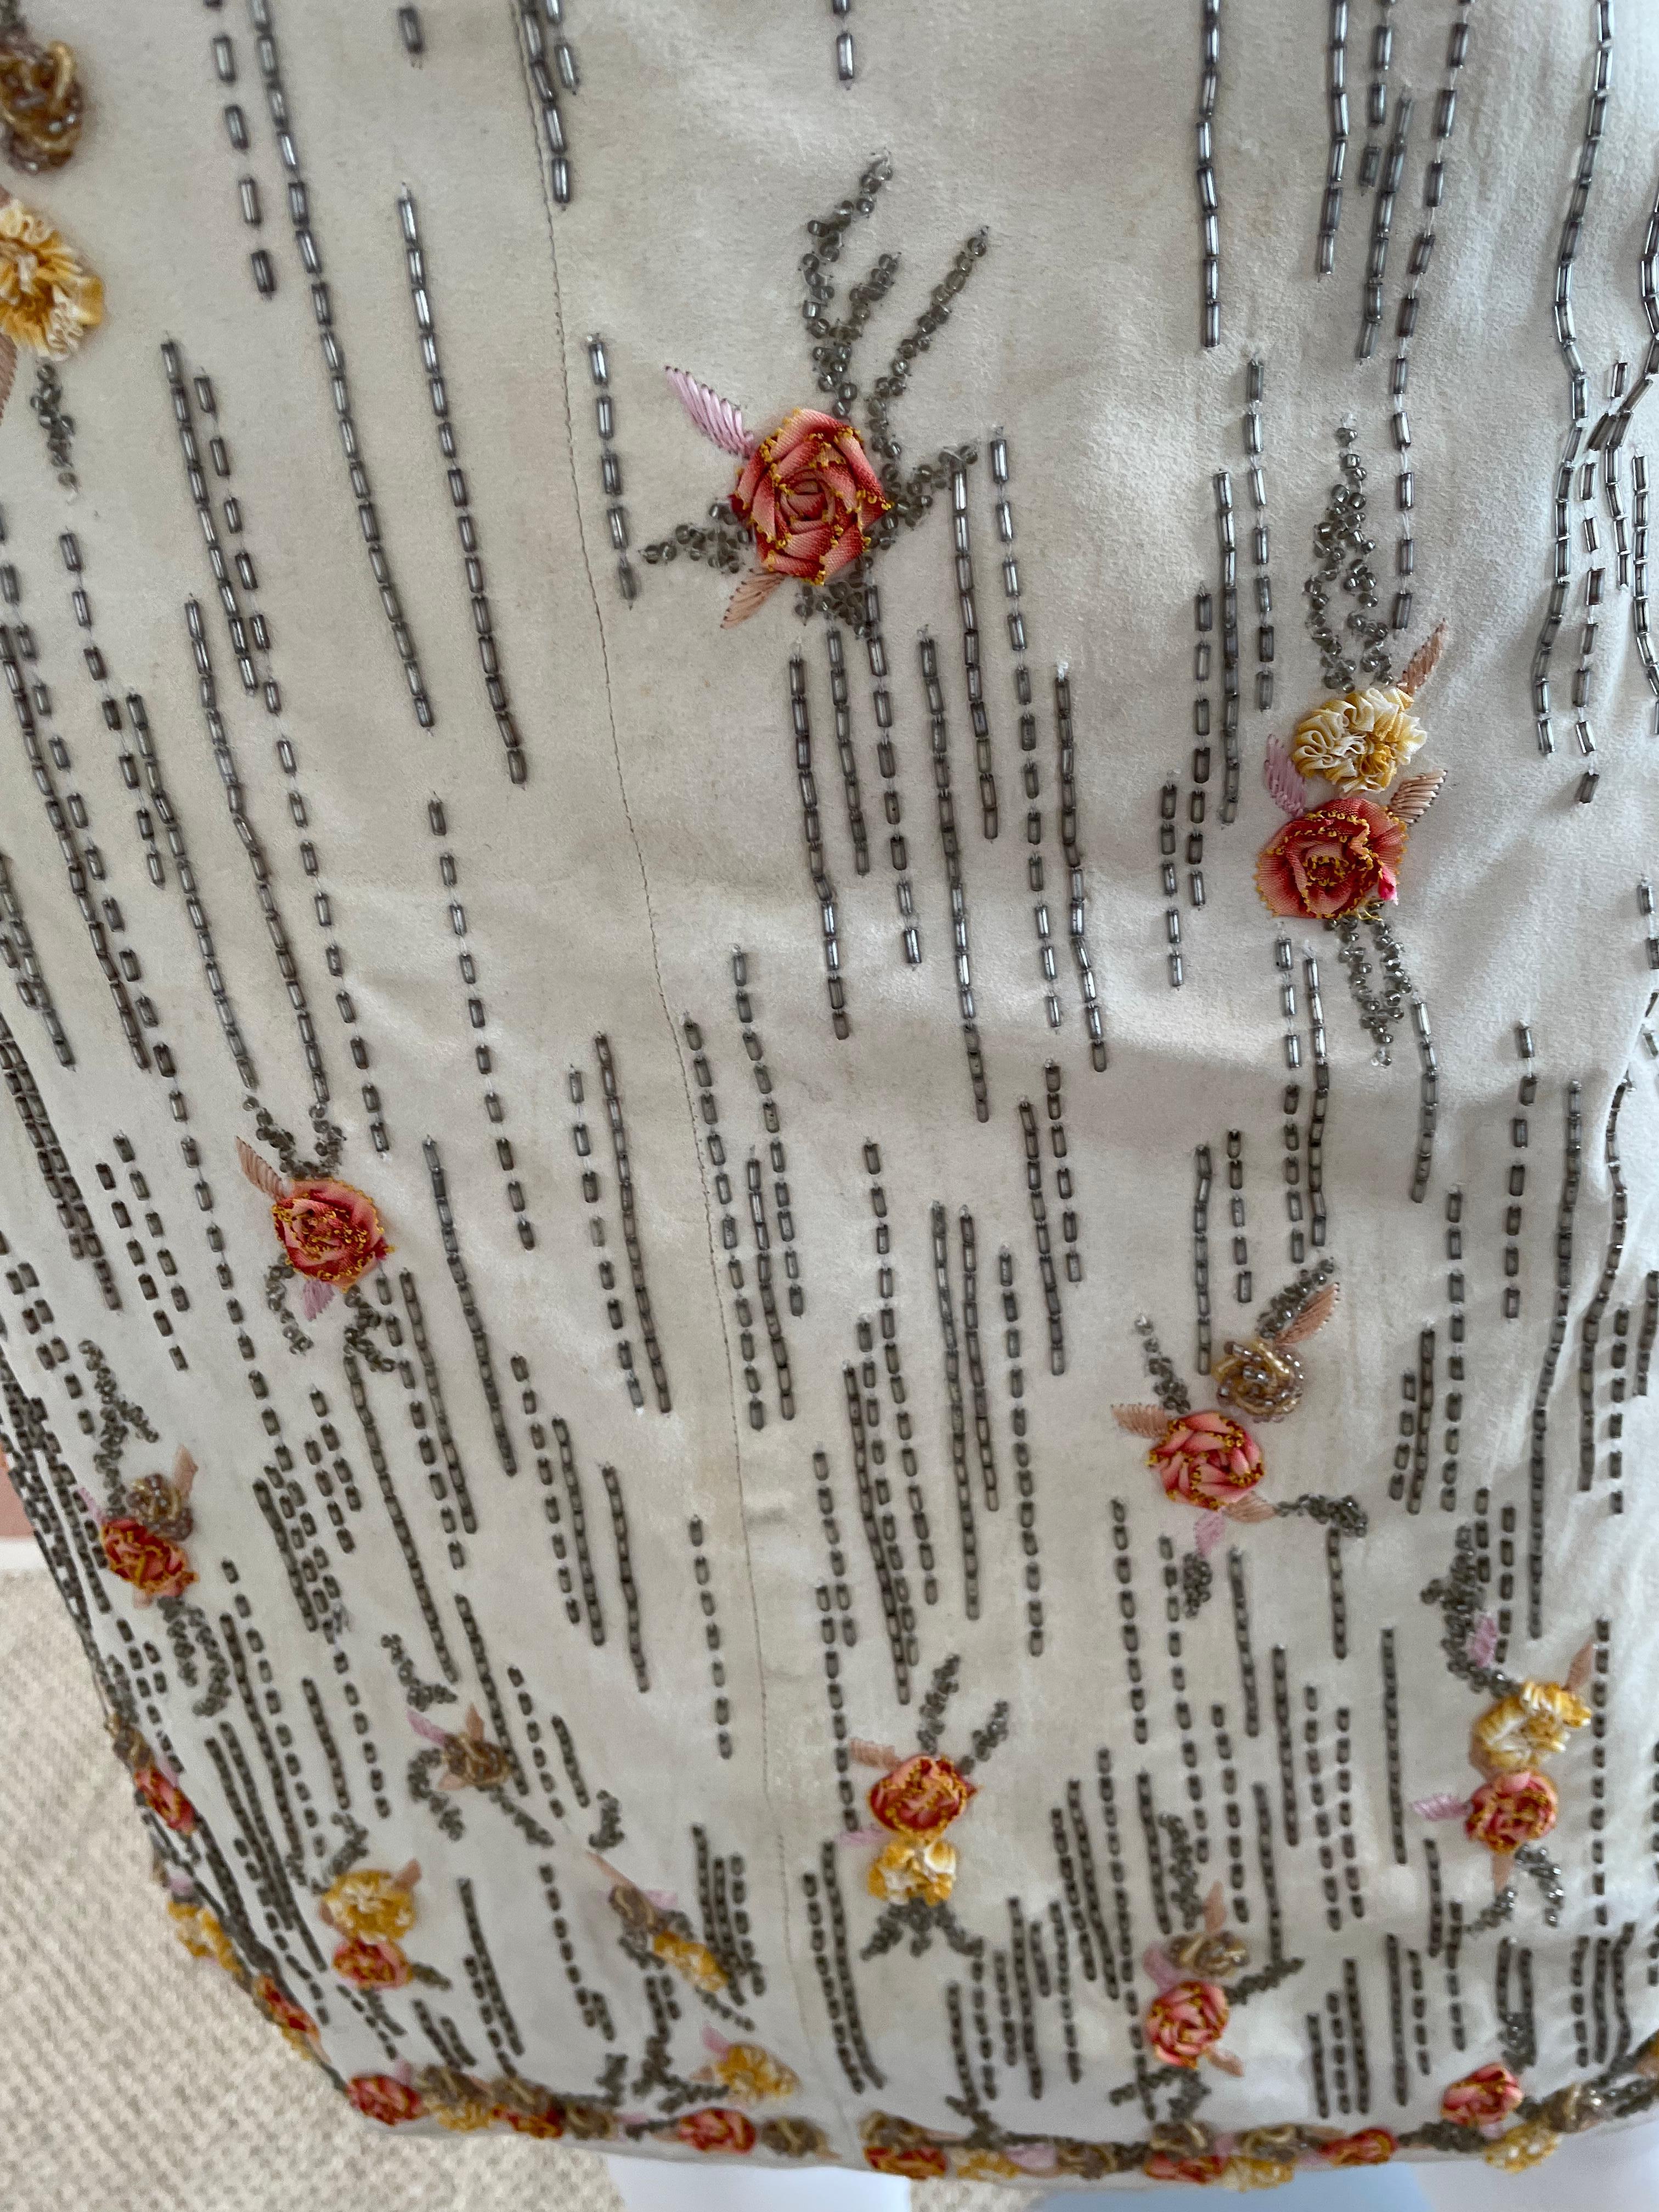 Vintage and rare Valentino Boutique Suede Skirt with Beaded Floral embellished trim. Tags still attached! Slight pen marked shown in the pictures. Originally $8000! Light beige suede. 100% lambskin. Size US 4. Made in Italy.